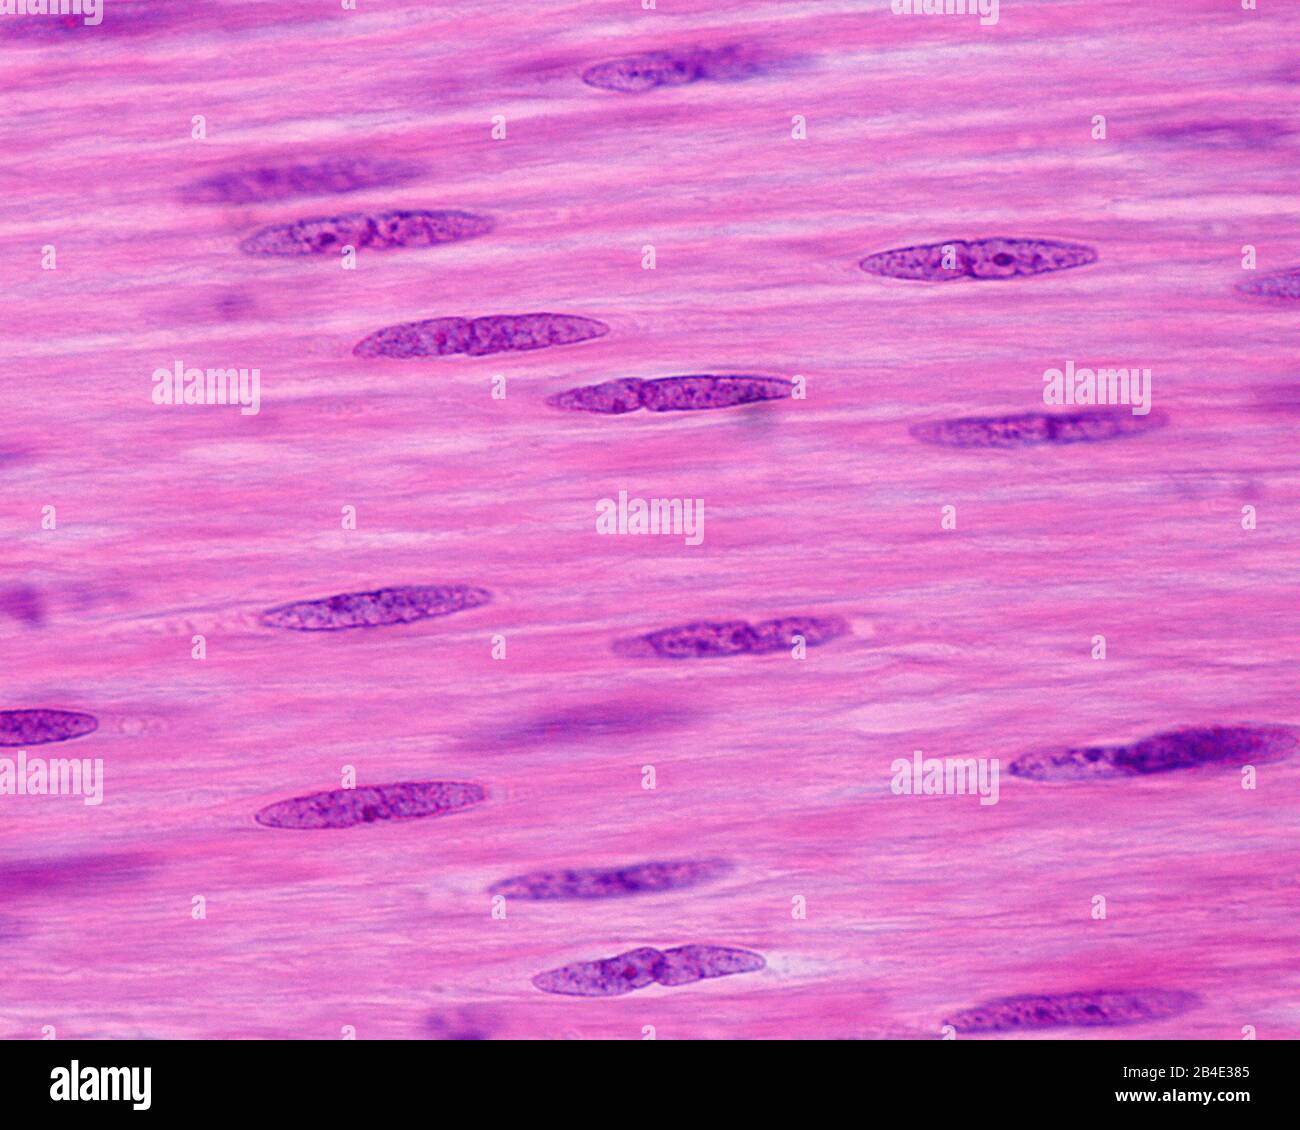 Nuclei Of Smooth Muscle Cells These Cells Show A Very Elongated